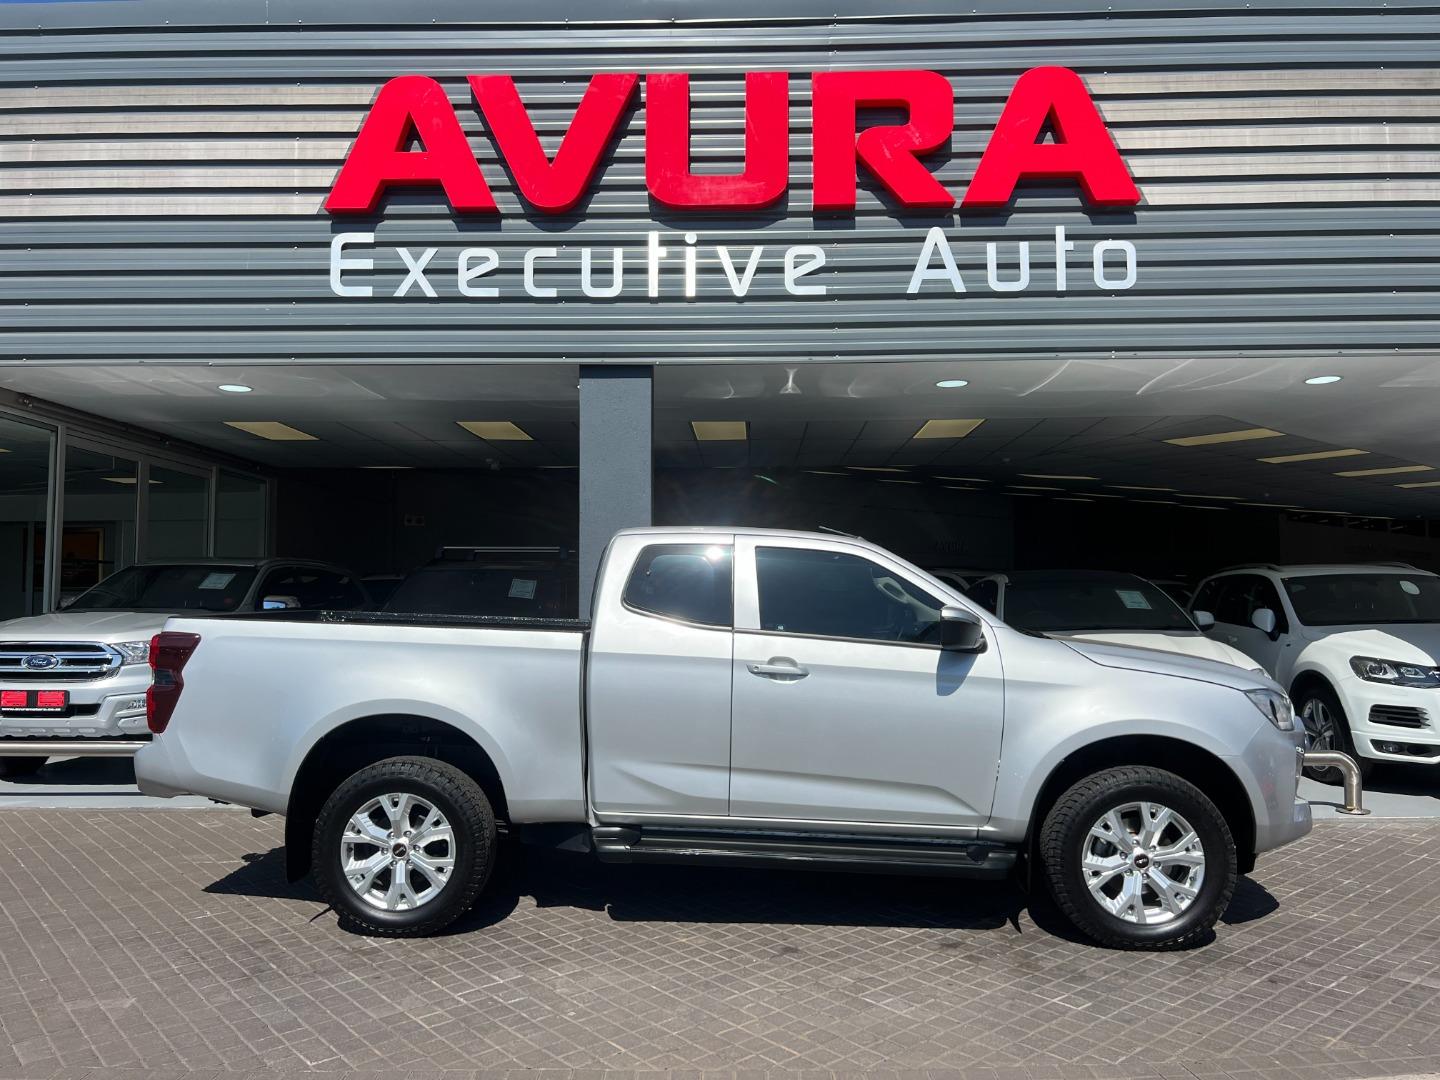 2022 Isuzu D-Max 1.9TD Extended Cab LS (Auto) For Sale